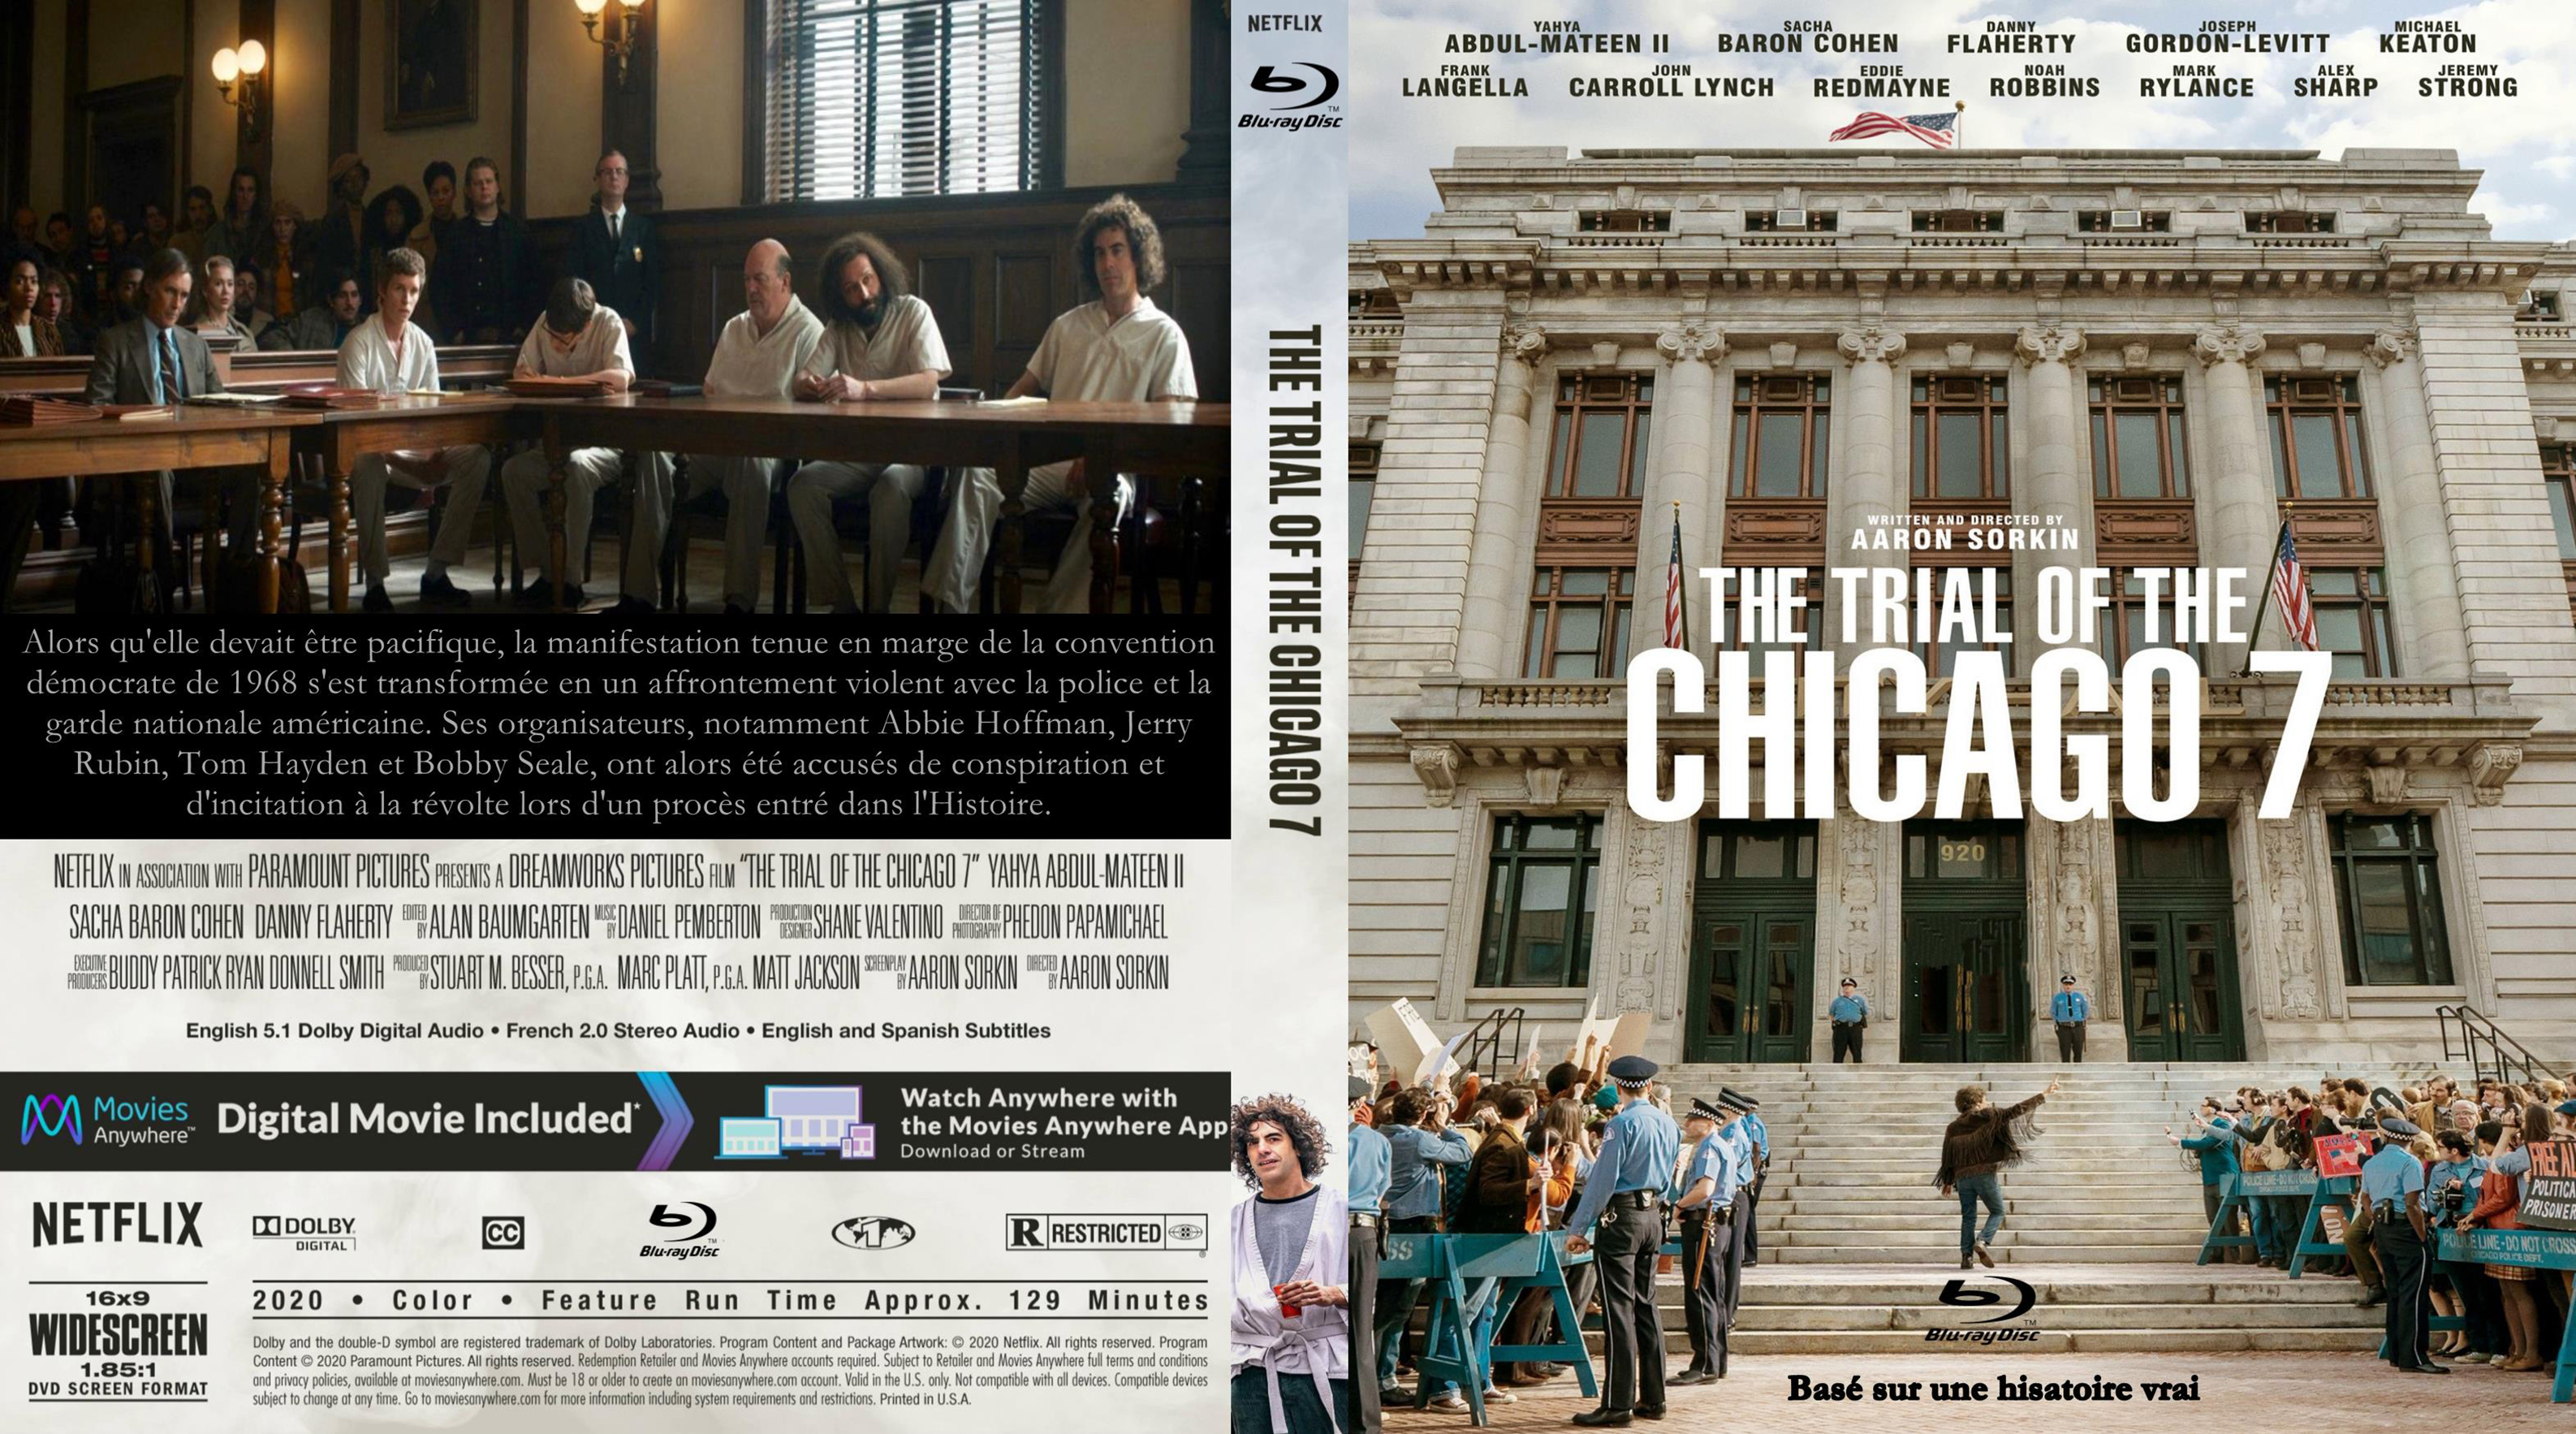 Jaquette DVD The trial of the chicago 7 custom (BLU-RAY)